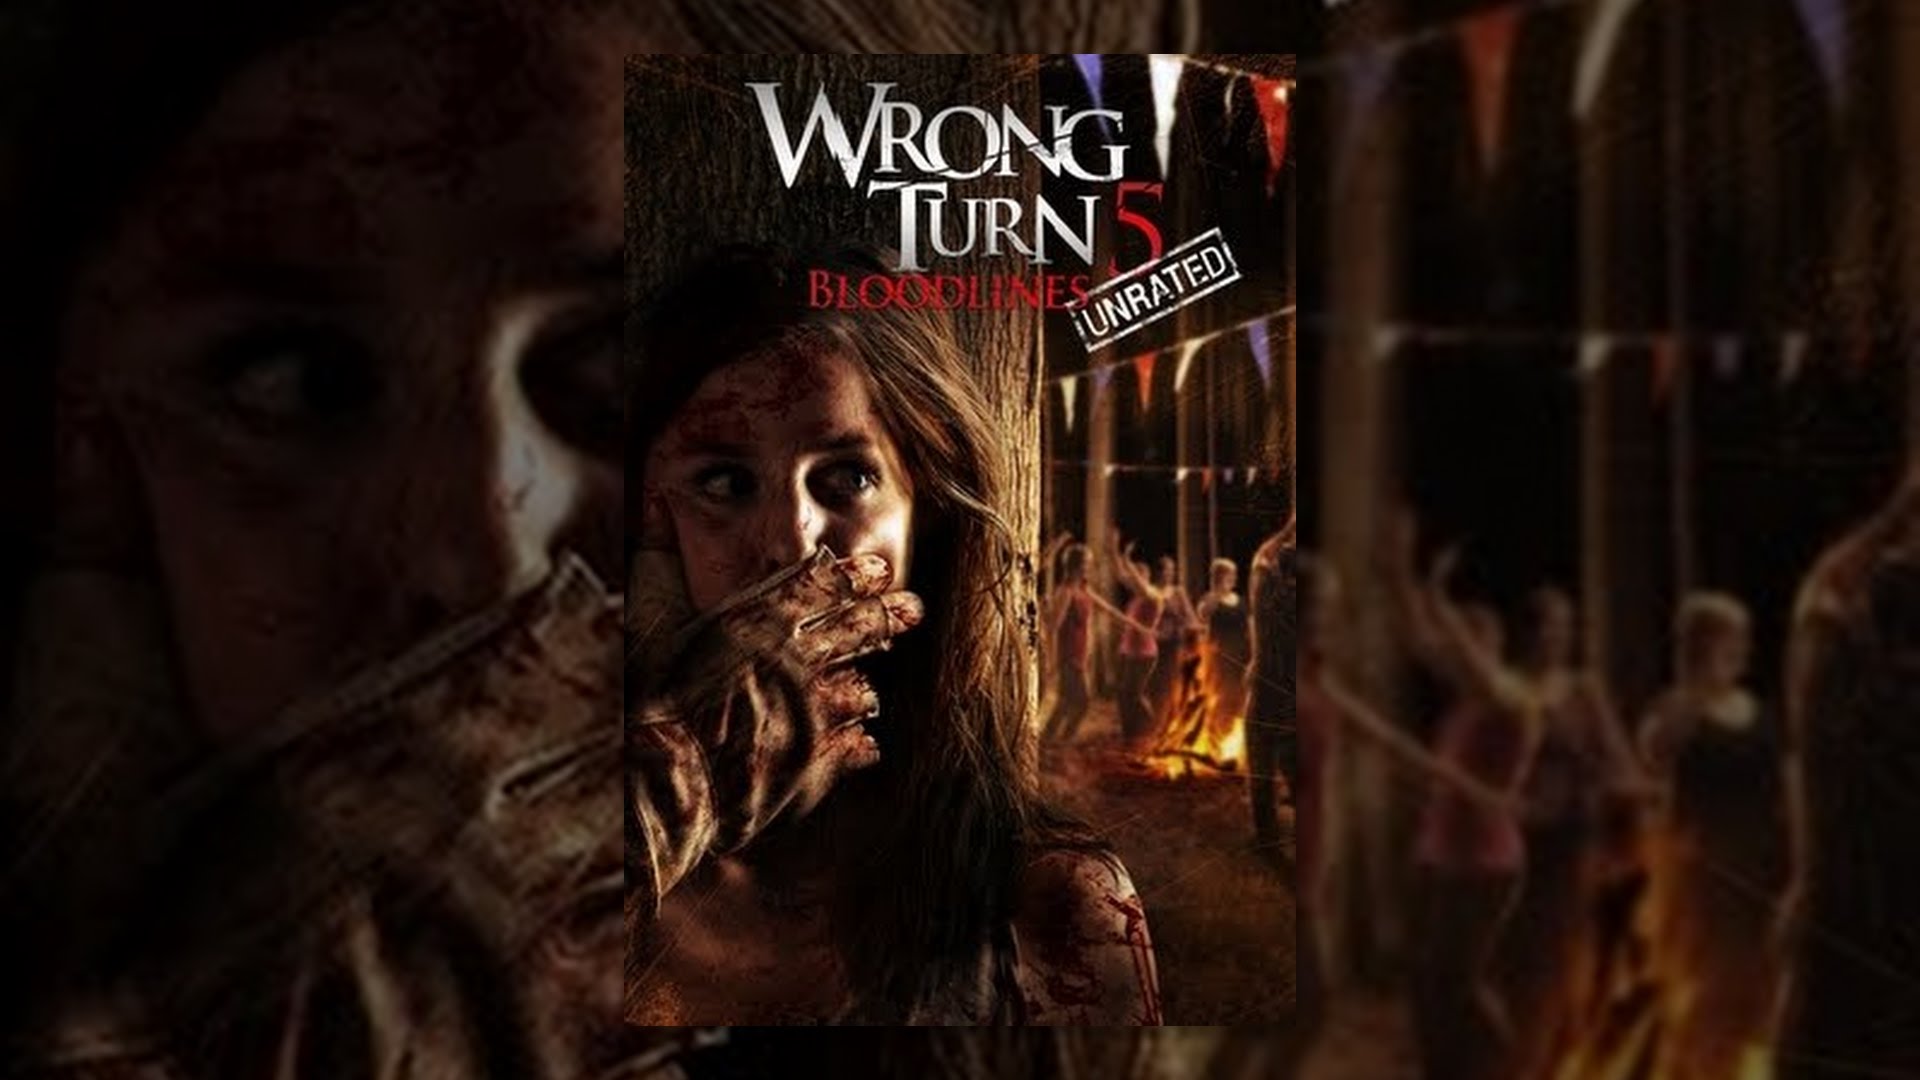 Wrong Turn 5: Bloodlines (Unrated) - YouTube1920 x 1080